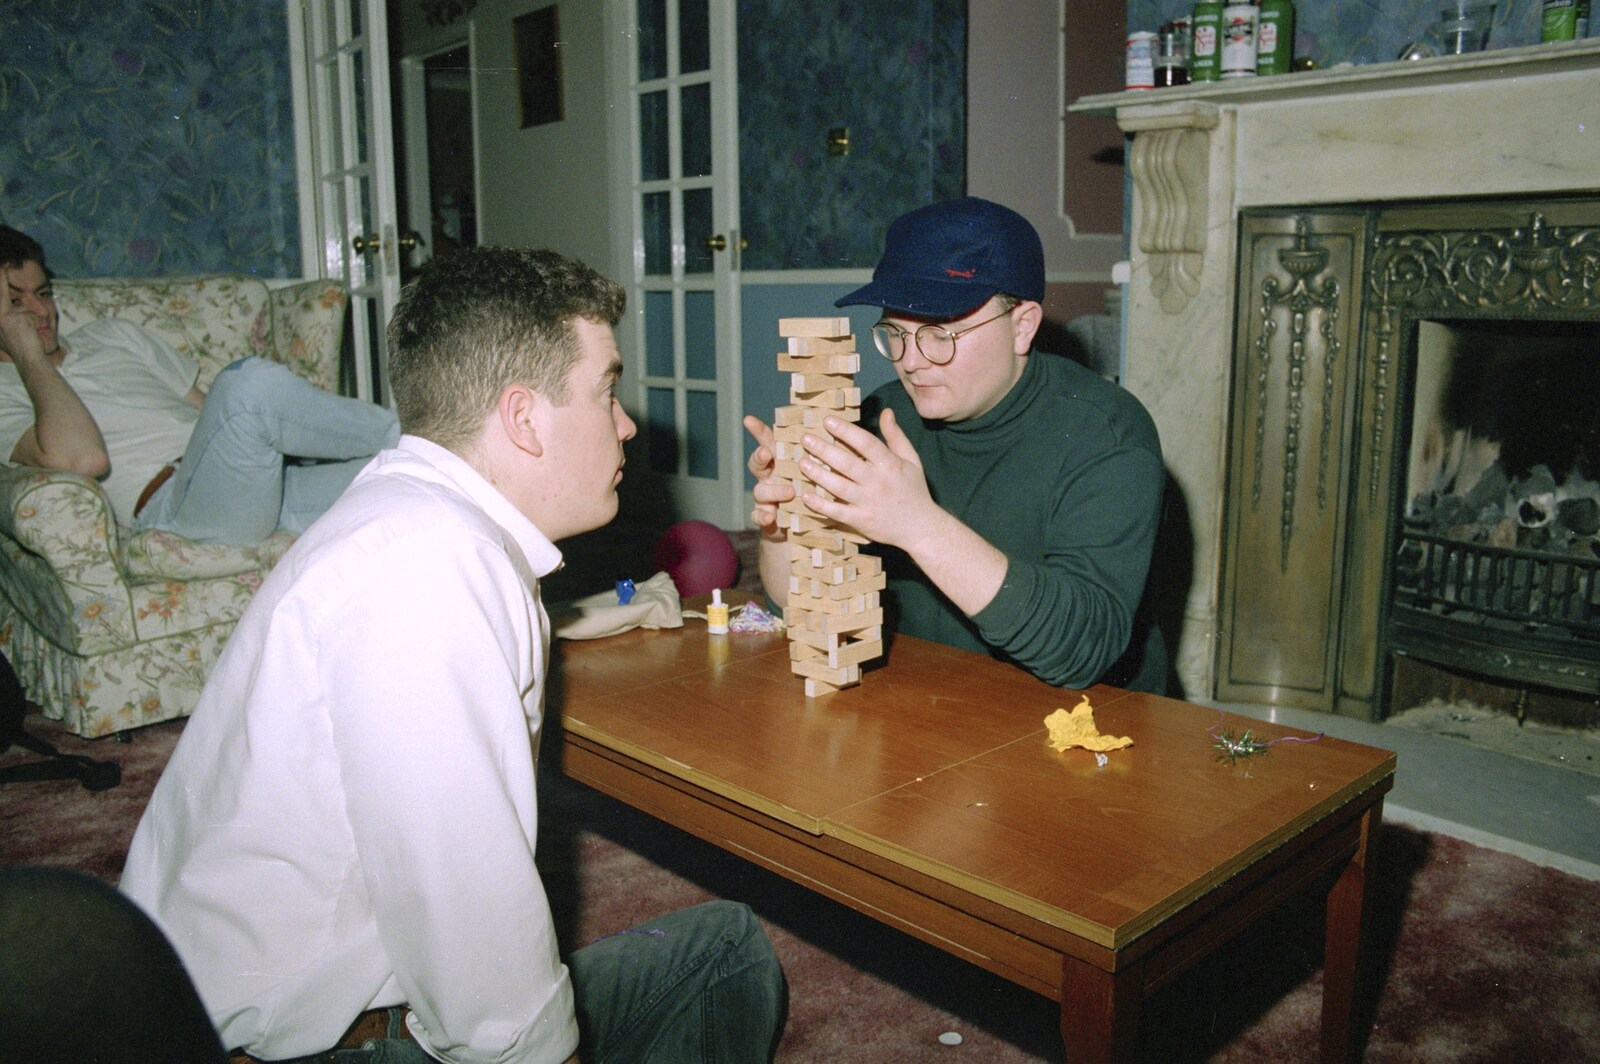 Hamish carefully stacks up the blocks from Christmas Down South, Burton and Walkford, Dorset - 25th December 1994